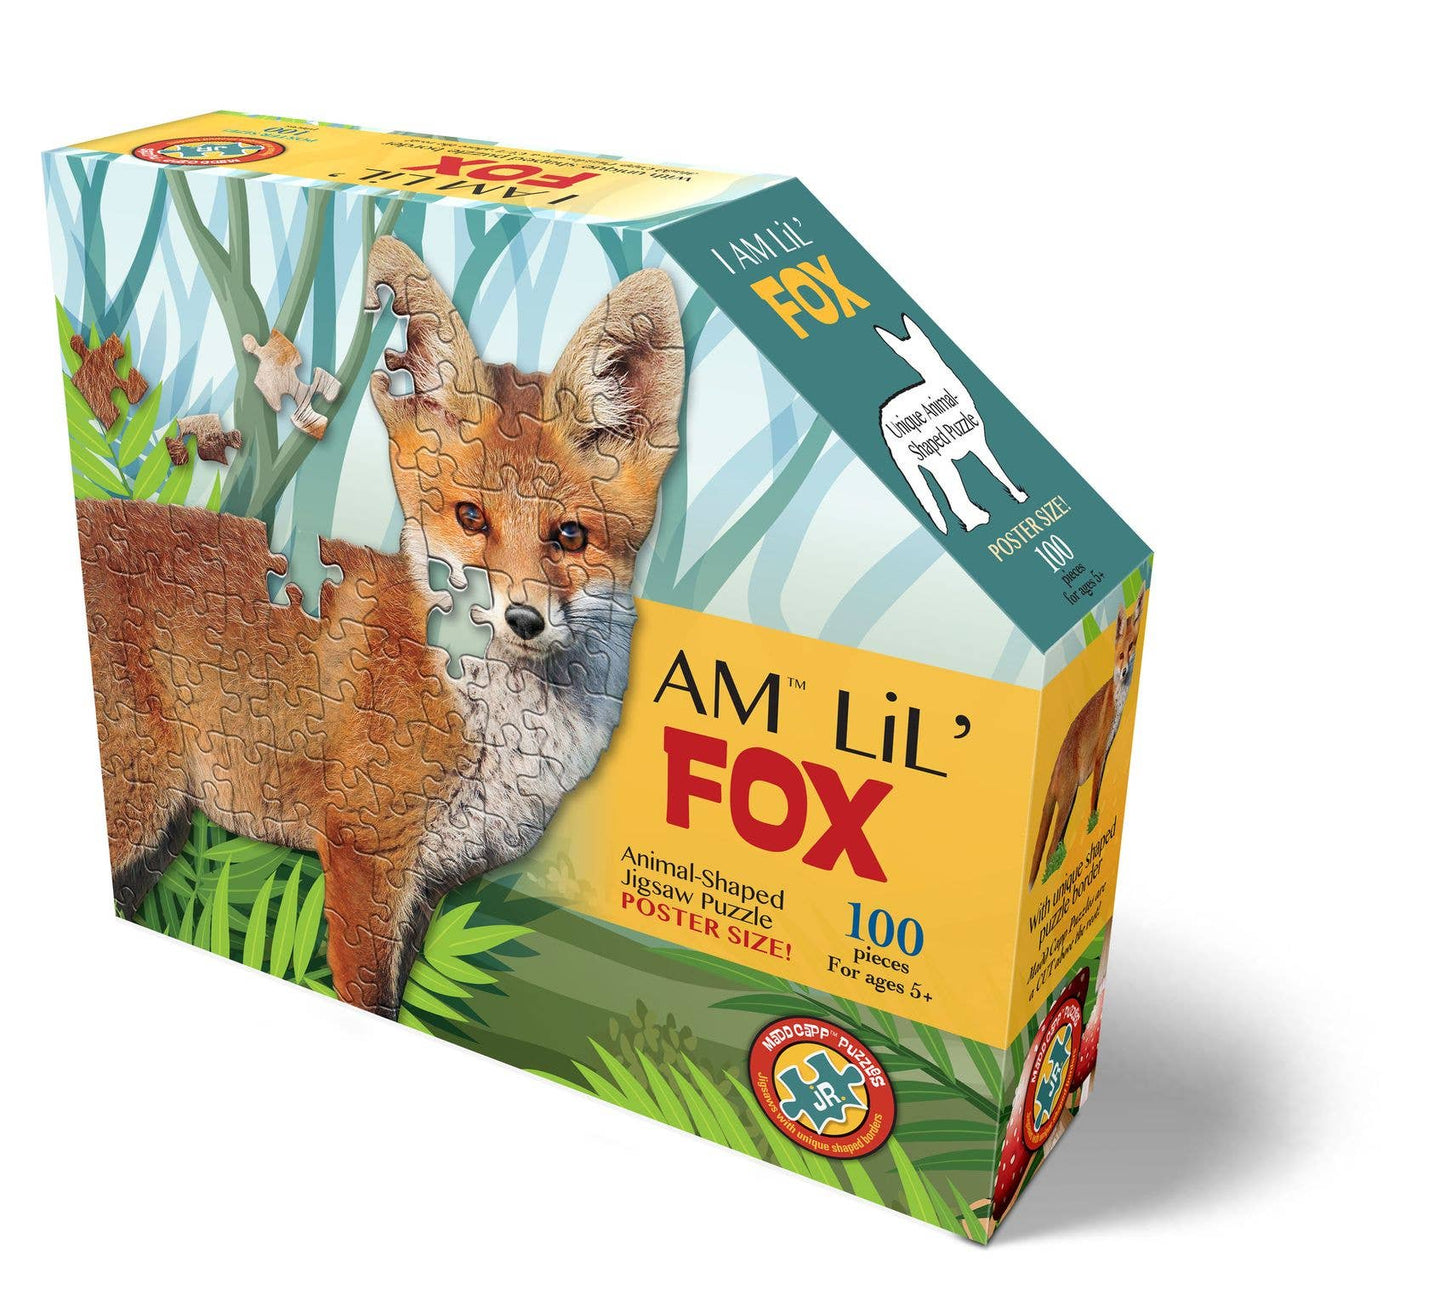 Madd Capp Games & Puzzles - I AM Lil FOX 100 piece jigsaw puzzle - gift